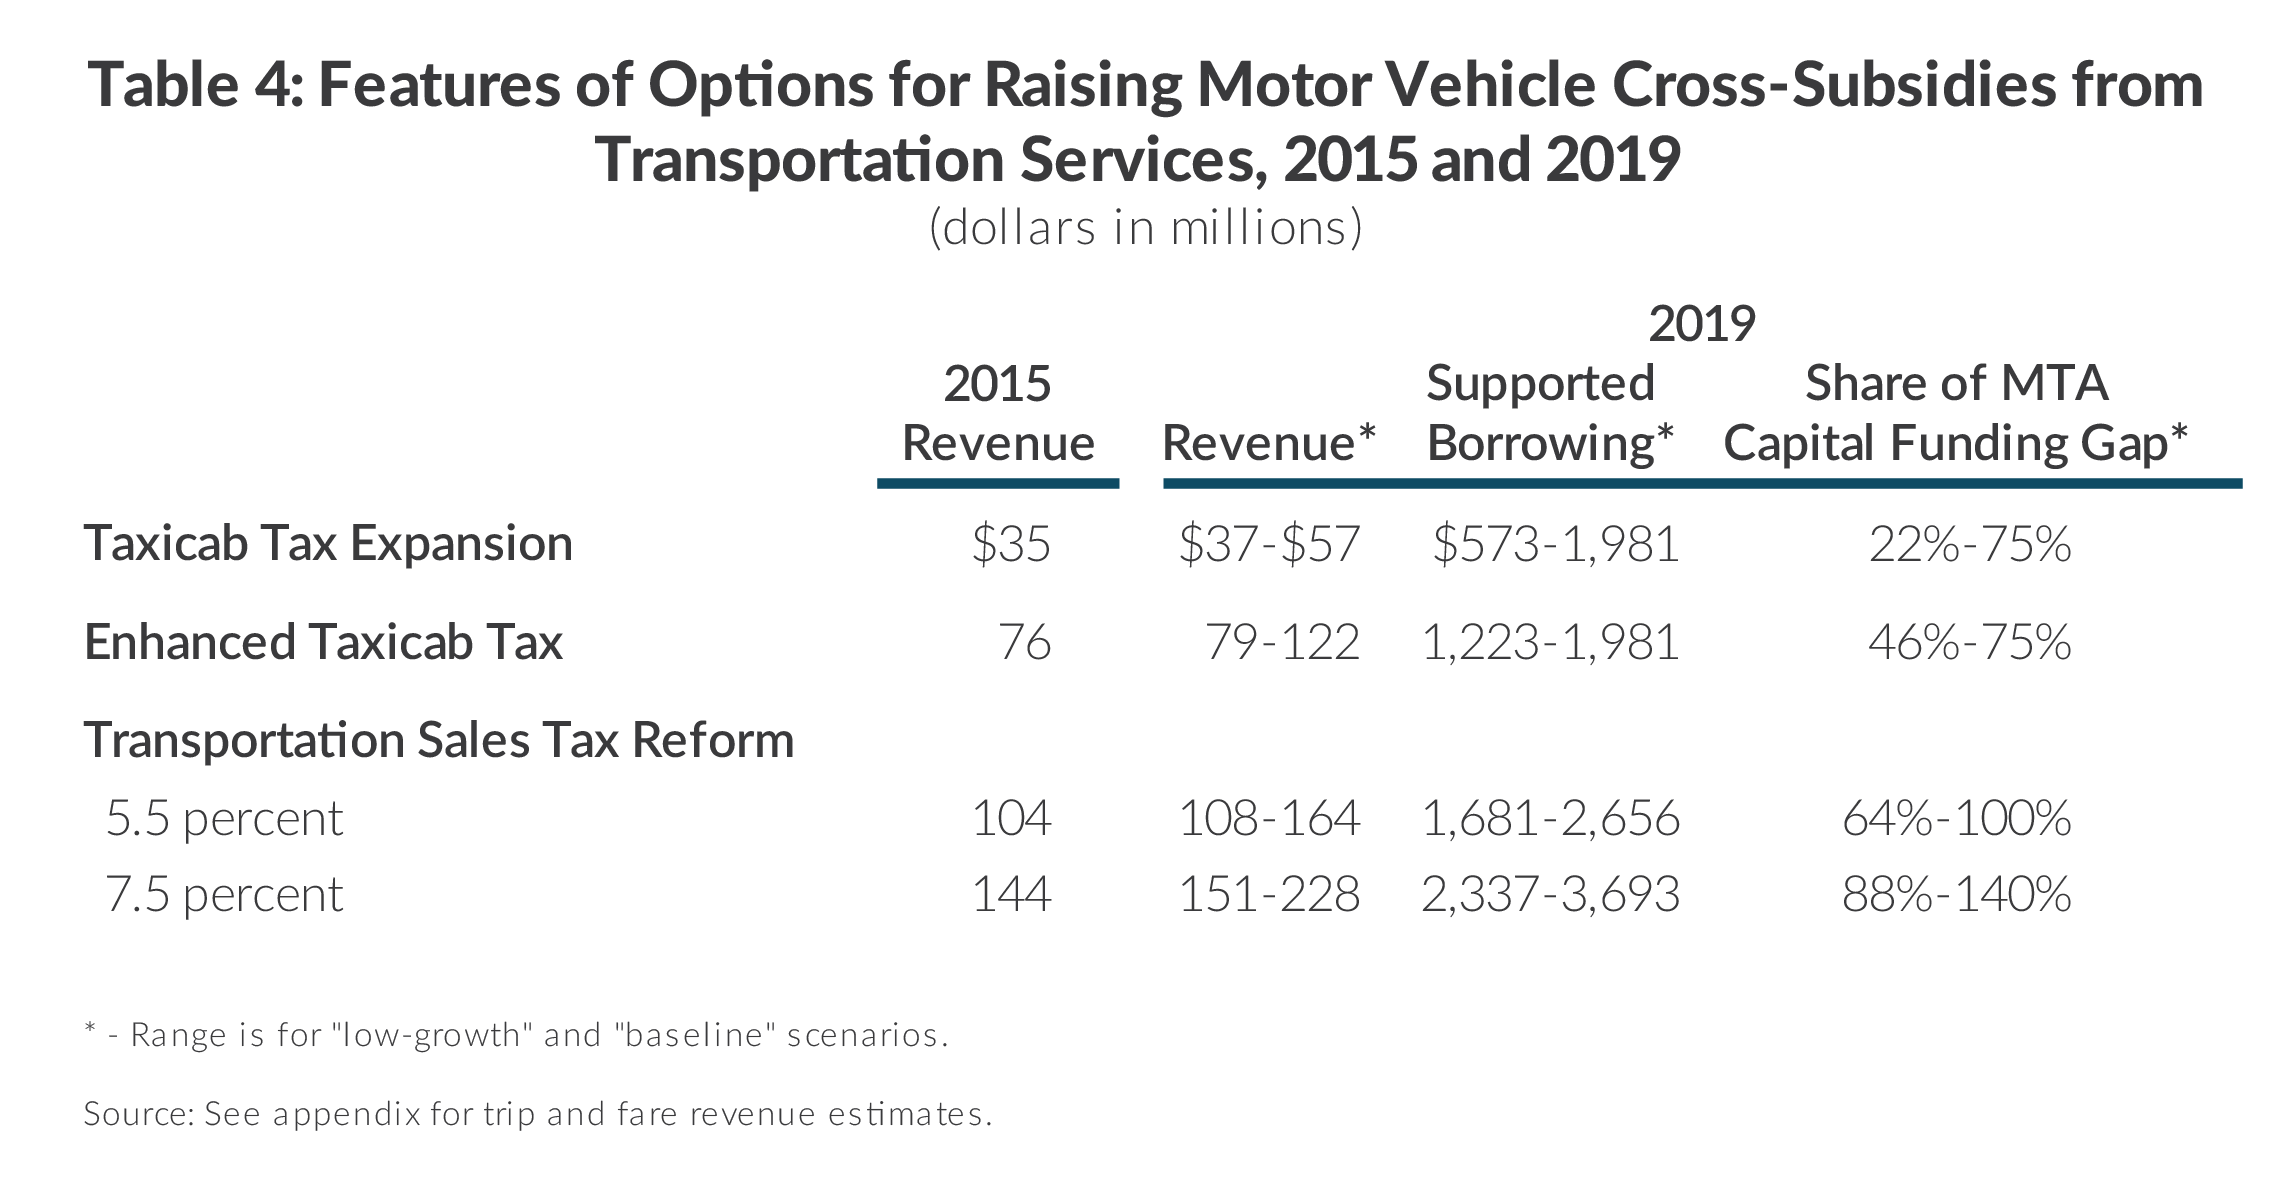 Table illustrating summary of options of raising motor vehicle cross-subsidies from Taxi and Limousin Commission services, revenue, supported borrowing, and share of MTA capital funding gap, includes expanded, expanded and enhanced taxicab tax, and transportation sales tax reform